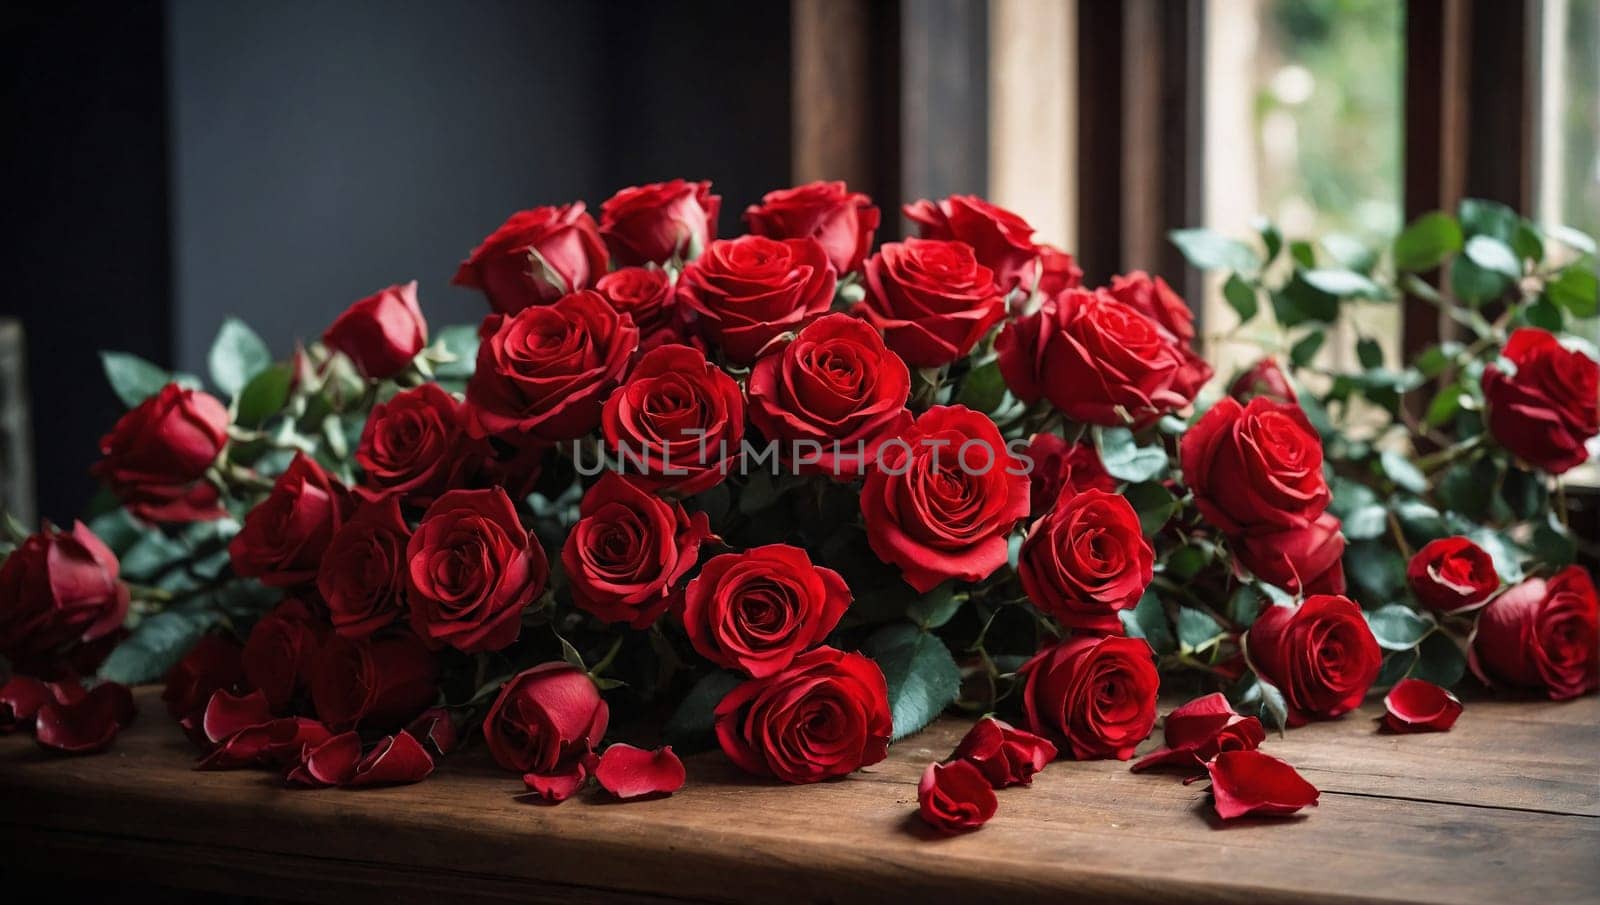 A collection of vibrant red roses arranged neatly on a wooden table.